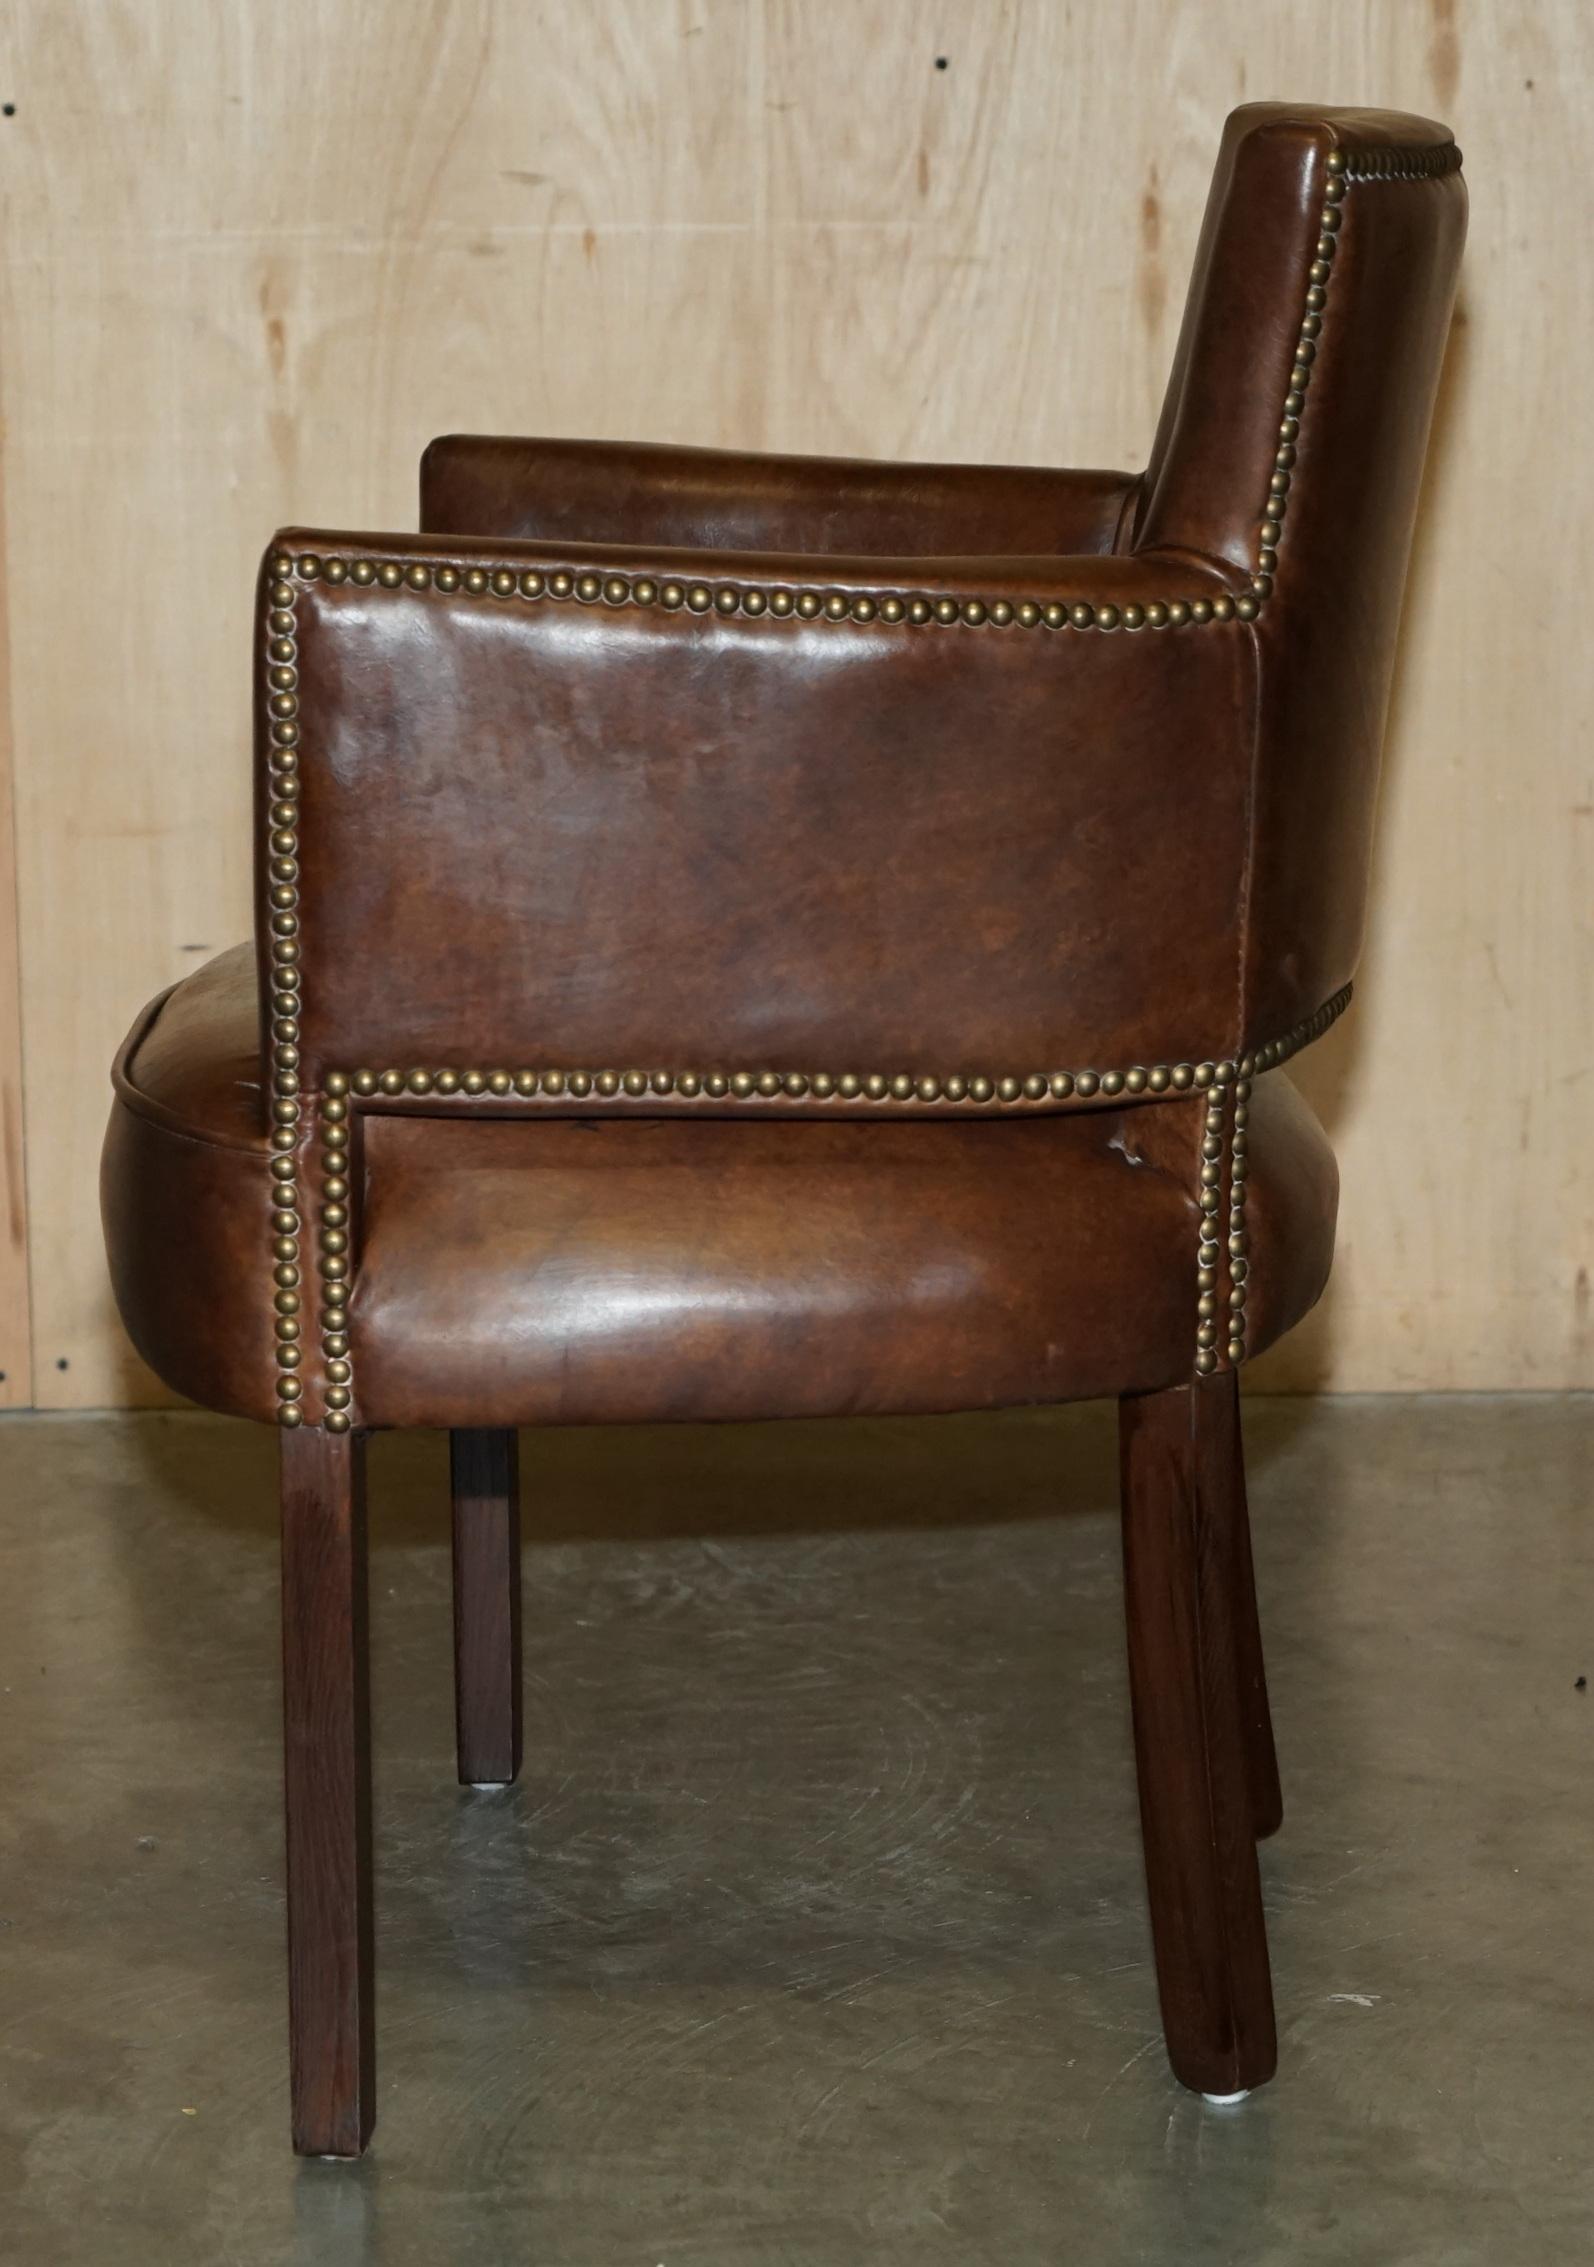 FINE PAIR OF ViNTAGE HALO HERITAGE BROWN LEATHER OCCASIONAL OR DINING CHAIRS 1